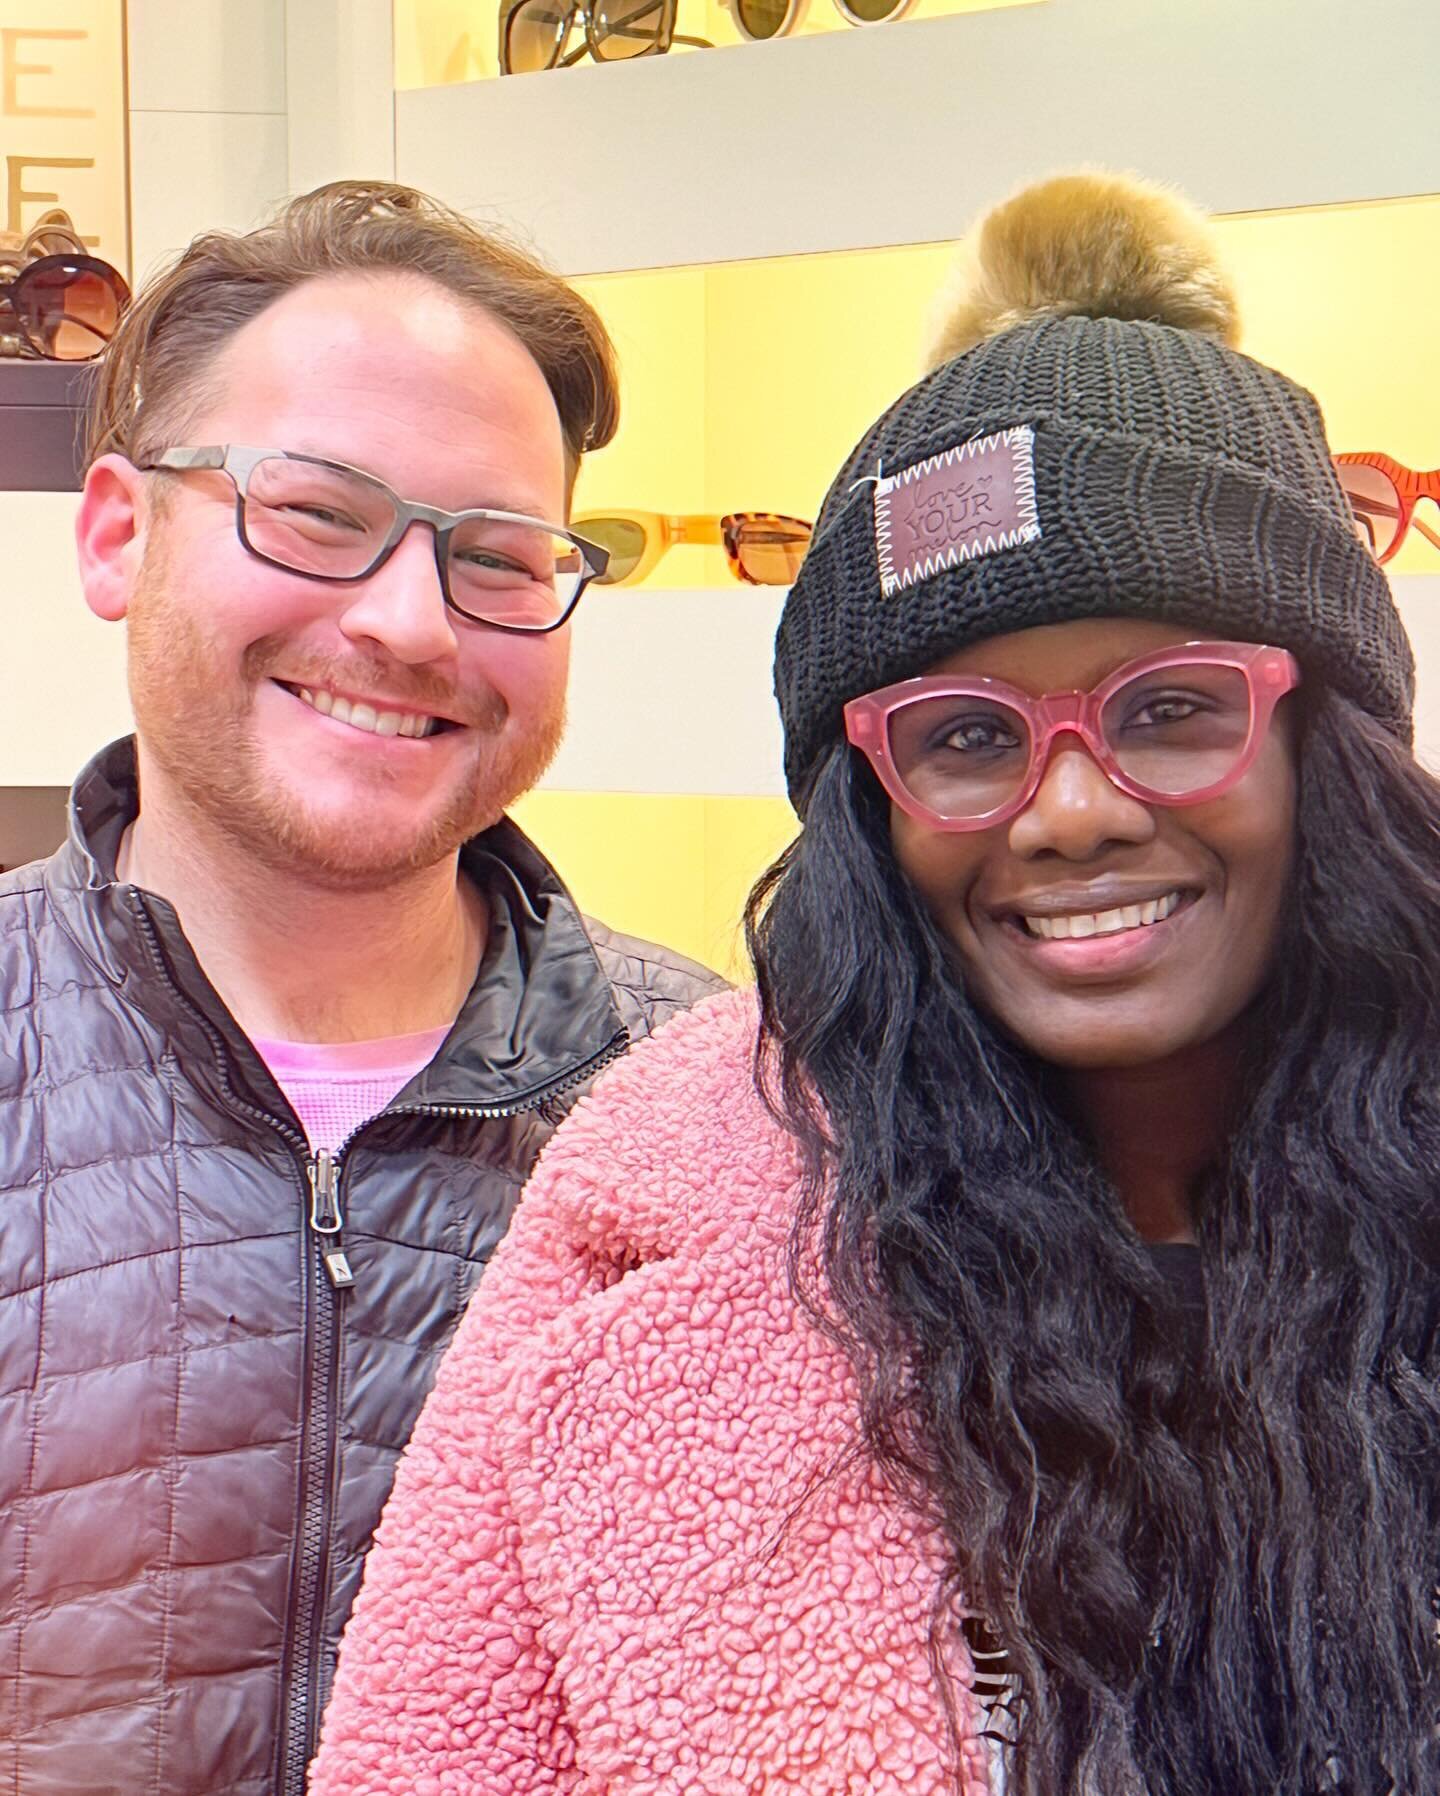 New glasses hit different when you pick them out with your partner! These two have been rocking frames from Eye Designs for over 10 years. #BestCustomers #shoplocal #shopsmall